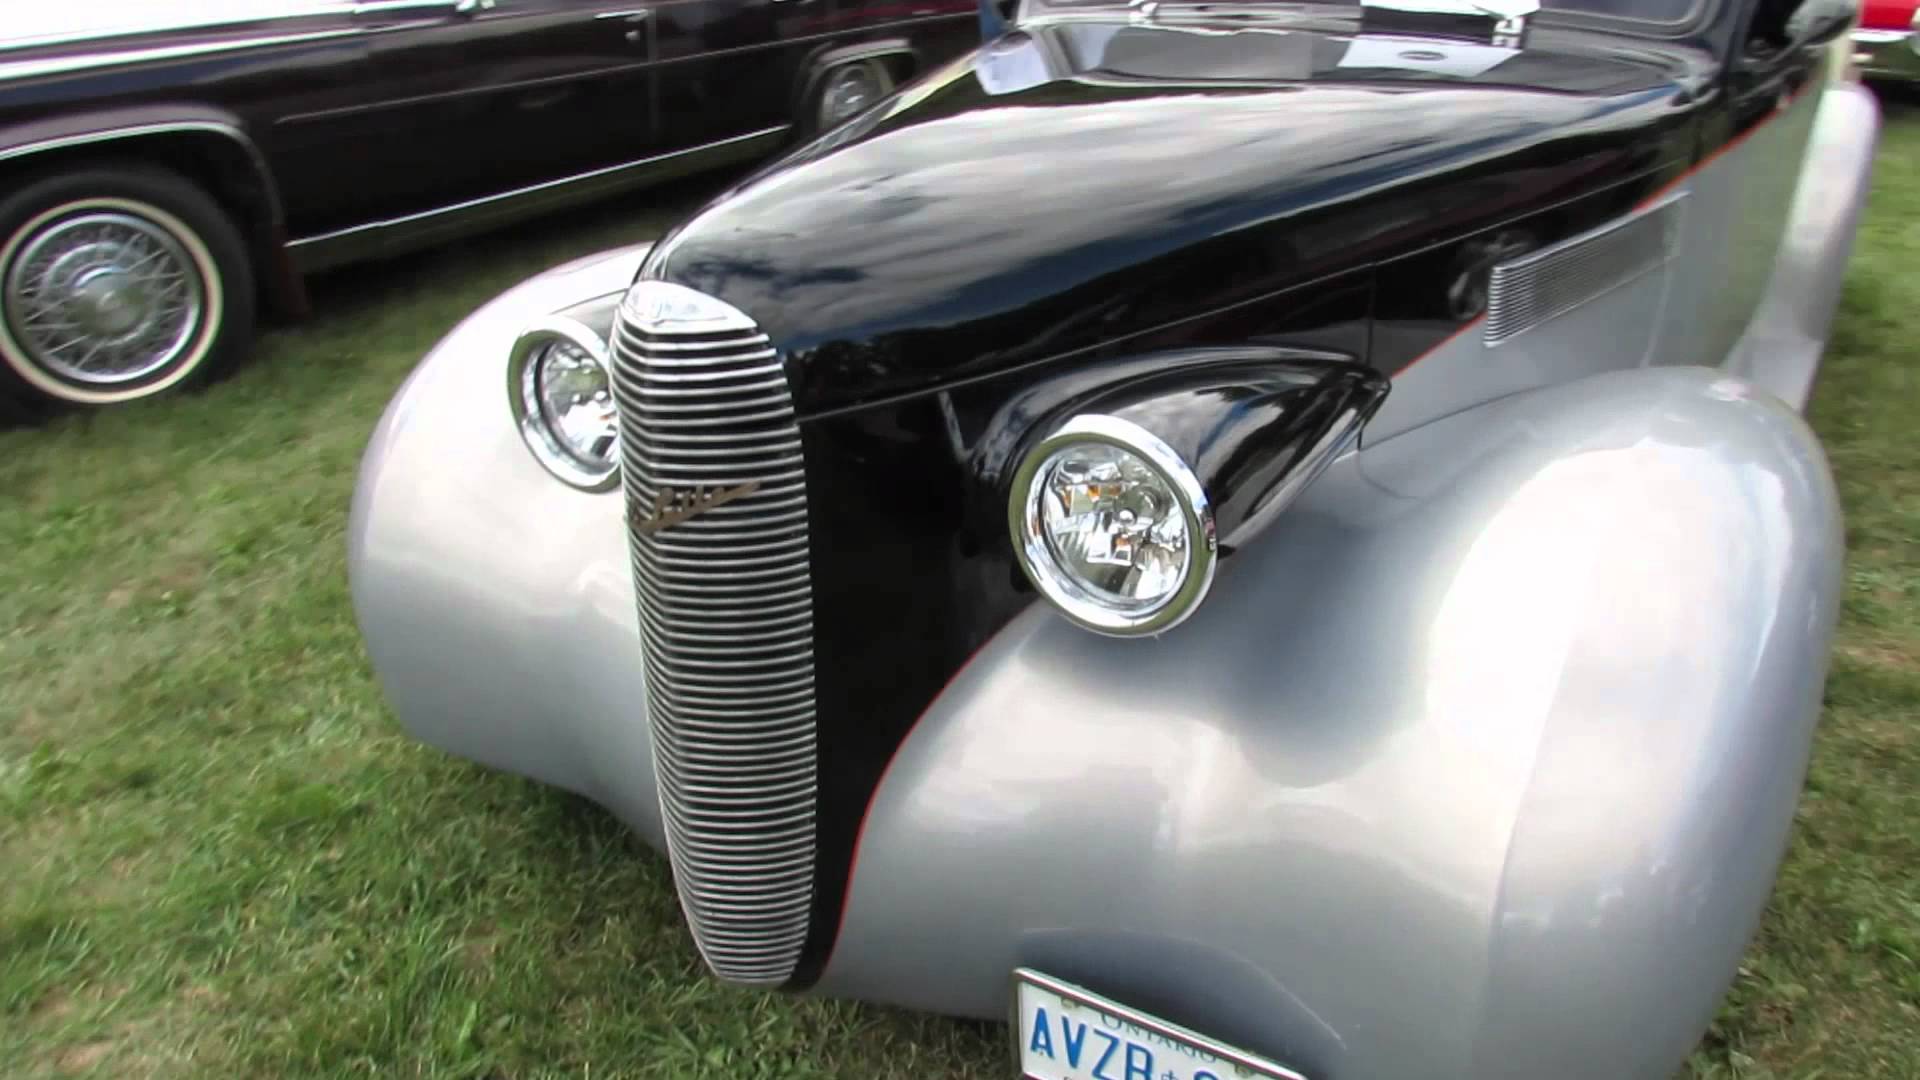 Nice wallpapers 1939 Cadillac Lasalle 1920x1080px